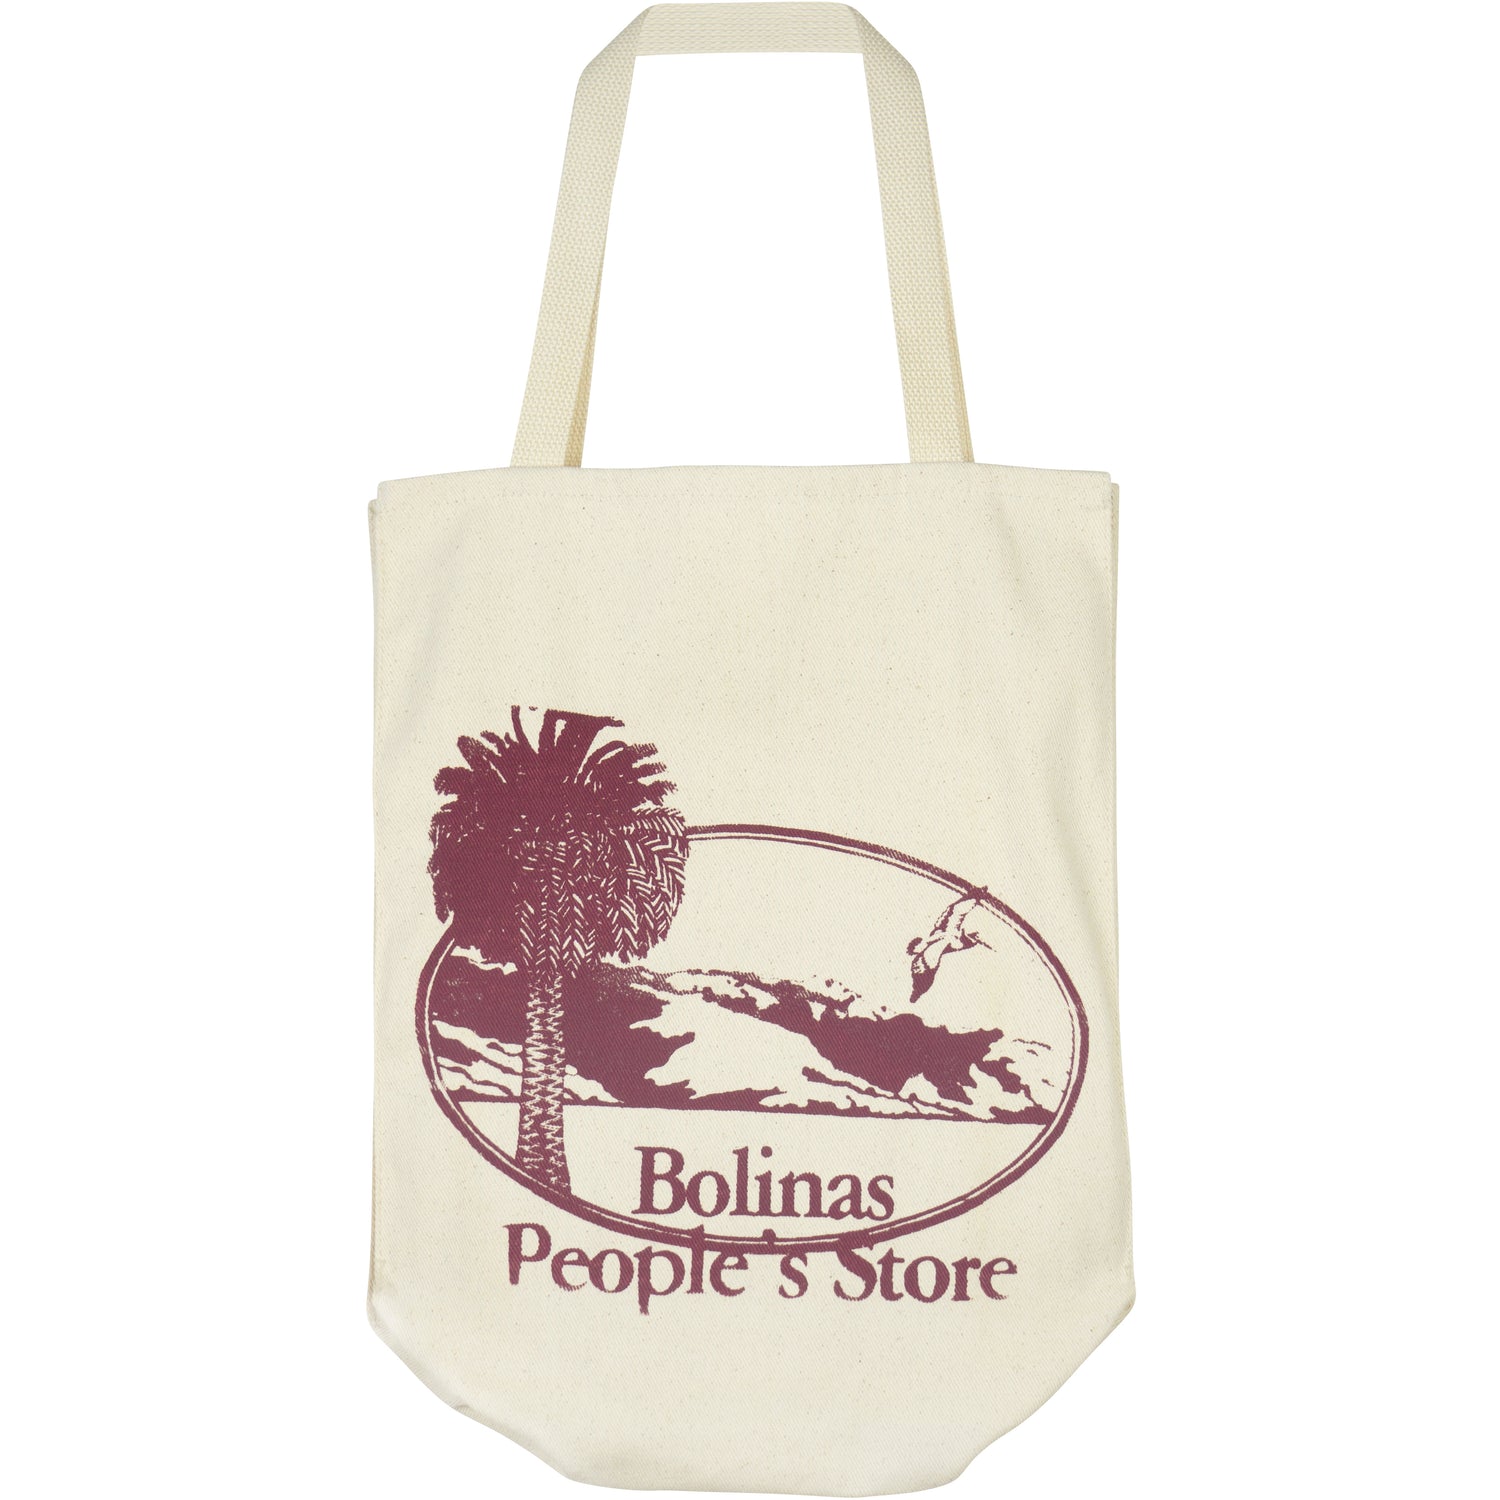 BOLINAS PEOPLE'S STORE CANVAS BAG